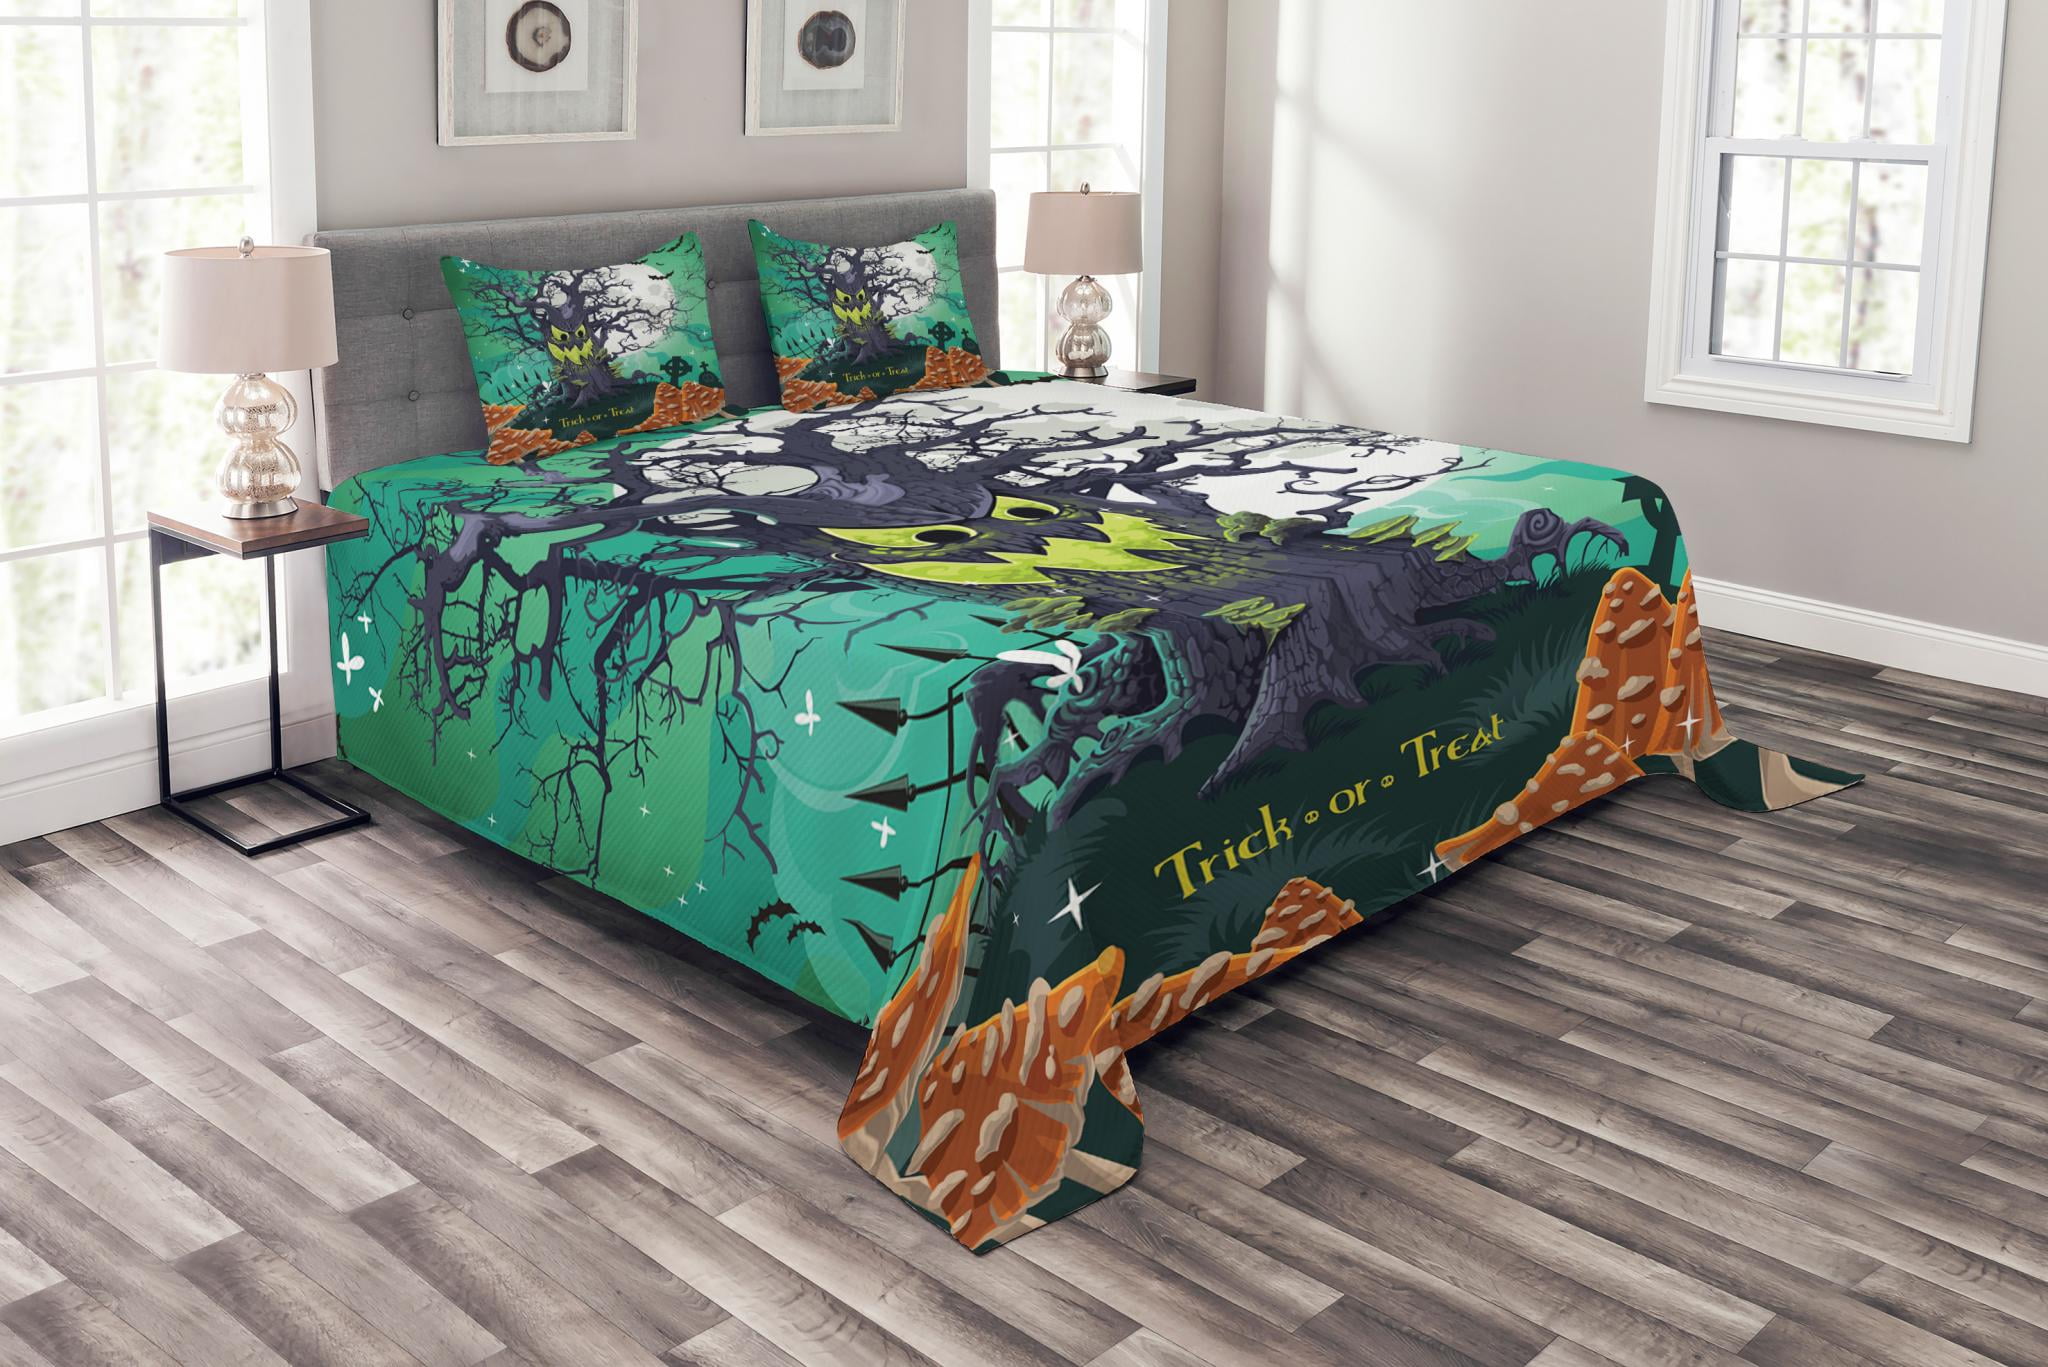 Cotton Alternative Filling Fantasy Staring Quilted Throw Blanket- Halloween Theme Horror Moon with Zombie Hand and Dark Castle Patchwork Bed Cover Quilt for Couch Sofa| Lightweight Warm 98 x 98